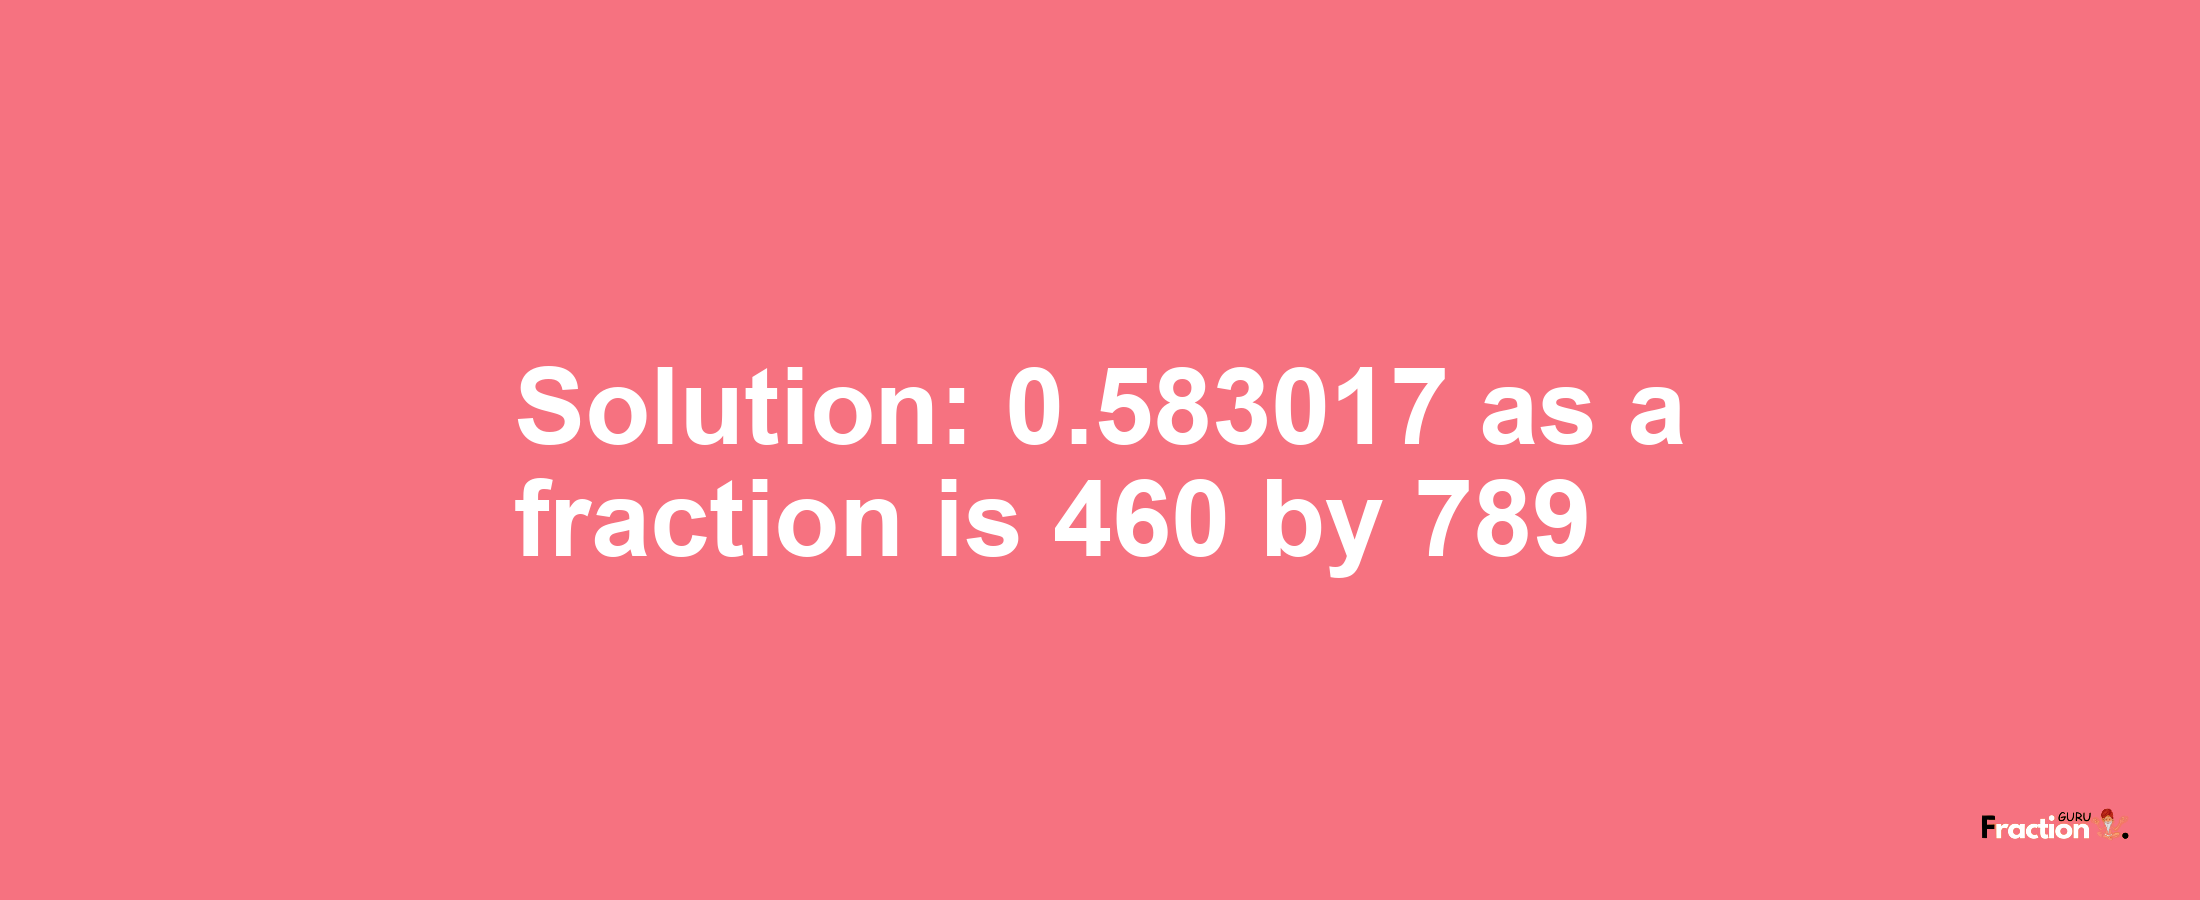 Solution:0.583017 as a fraction is 460/789